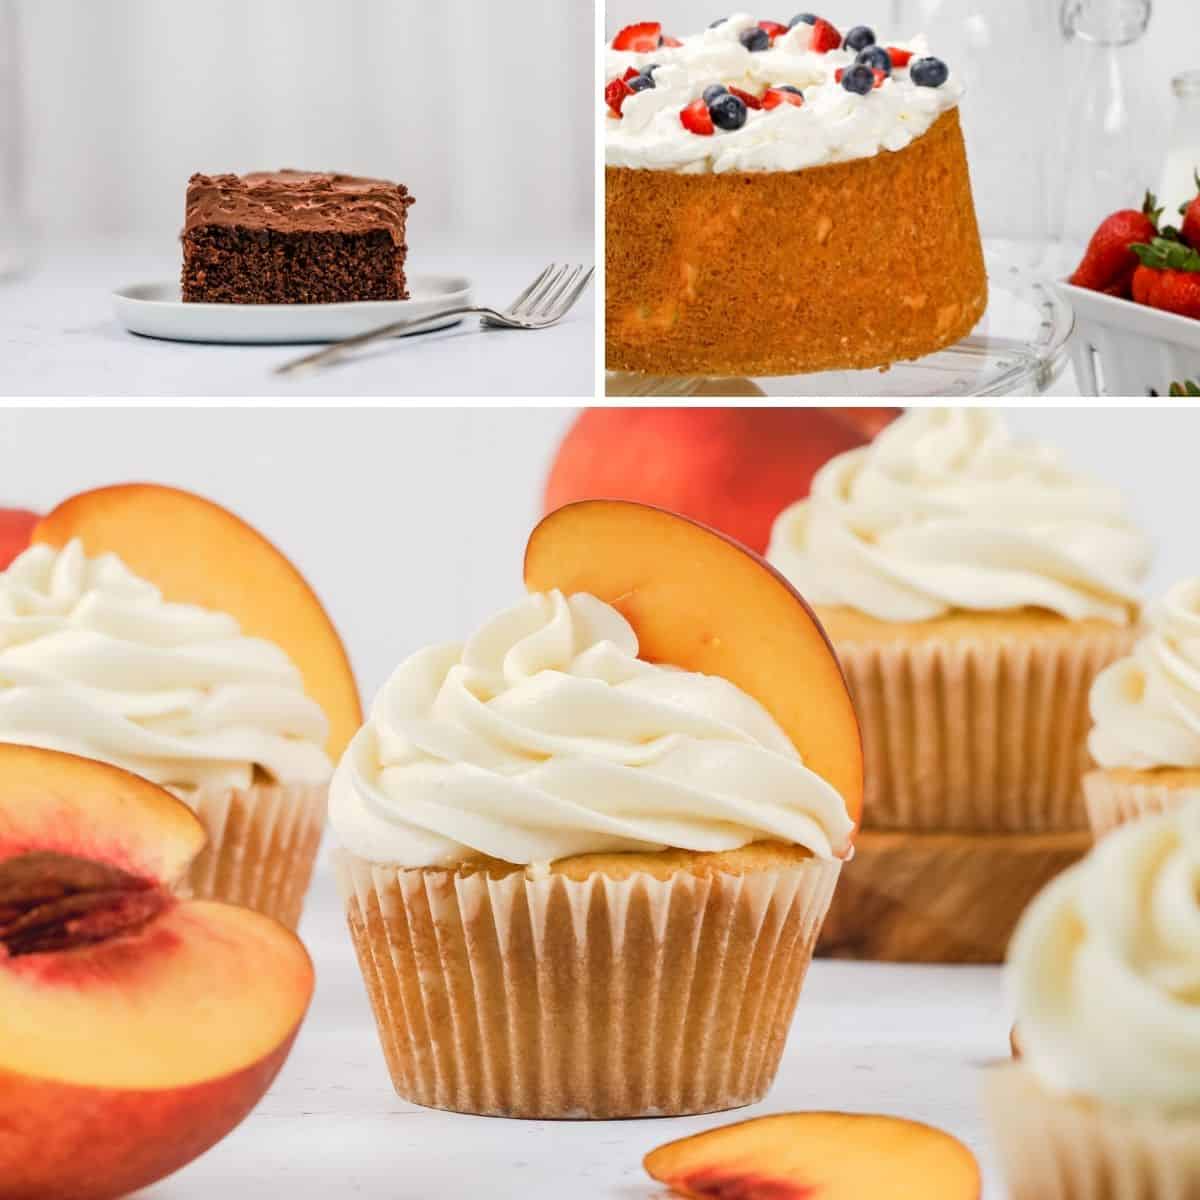 collage of 3 images of desserts for brunch including cakes and cupcakes